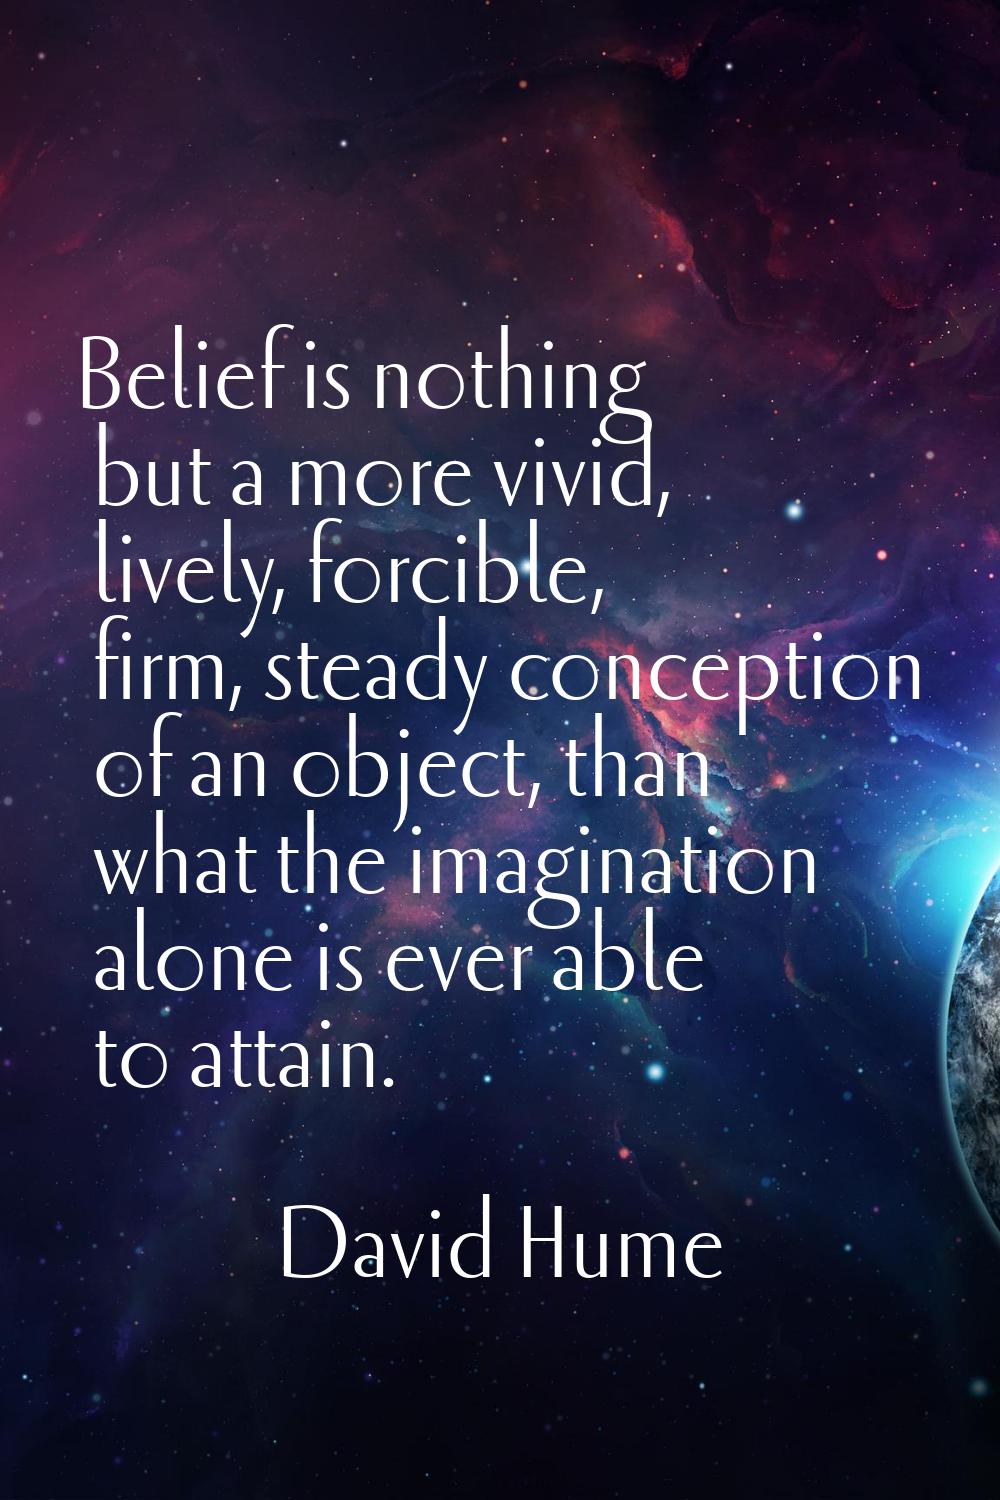 Belief is nothing but a more vivid, lively, forcible, firm, steady conception of an object, than wh